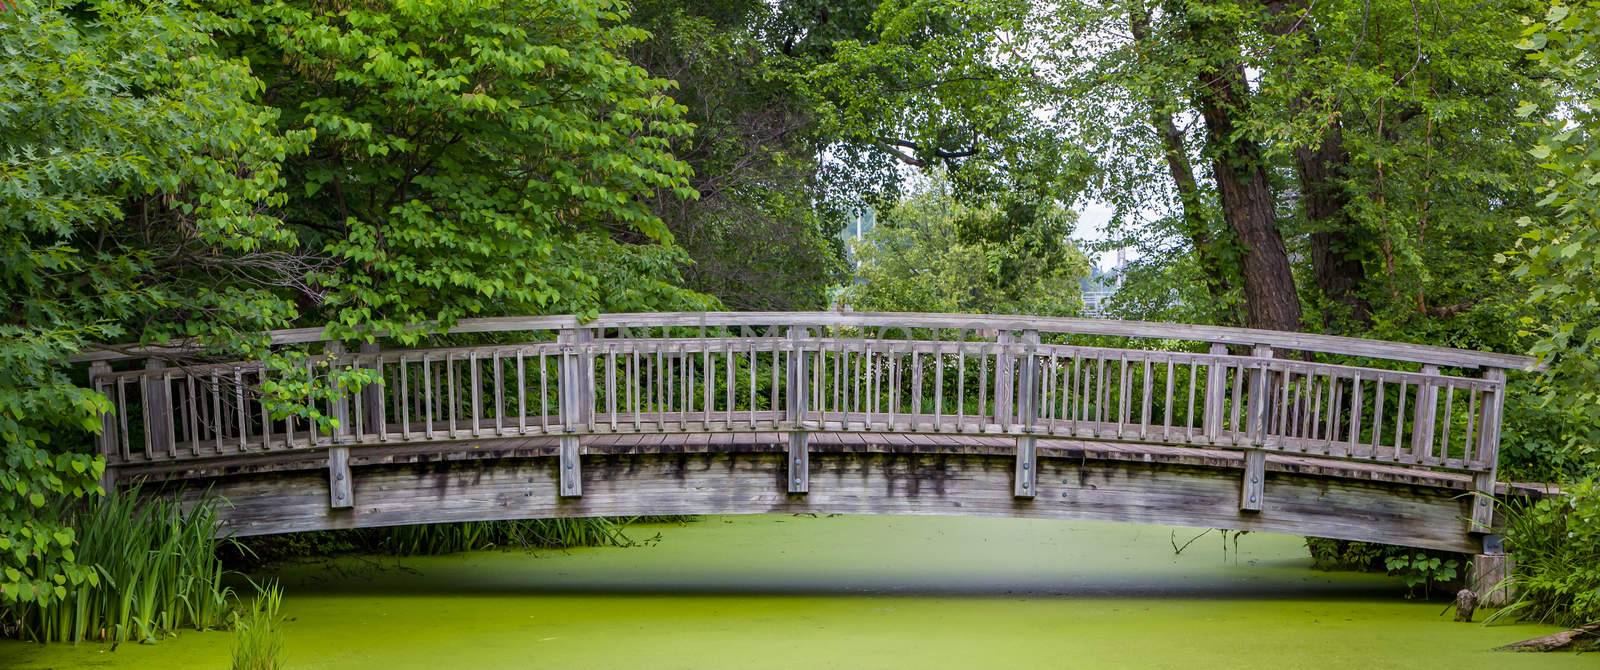 Wood Bridge Over Pond Panorma by wolterk